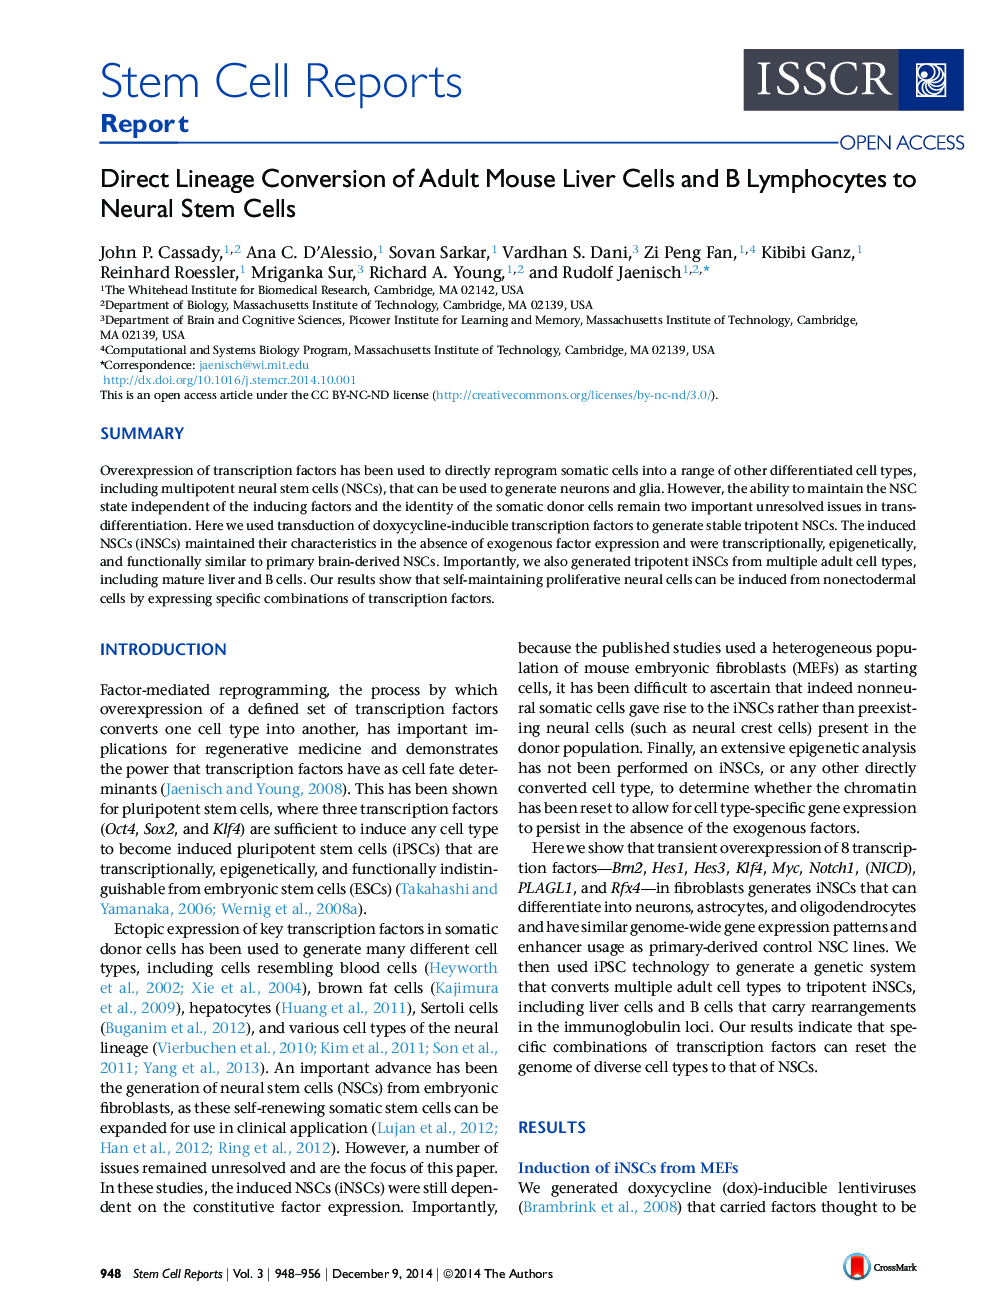 Direct Lineage Conversion of Adult Mouse Liver Cells and B Lymphocytes to Neural Stem Cells 